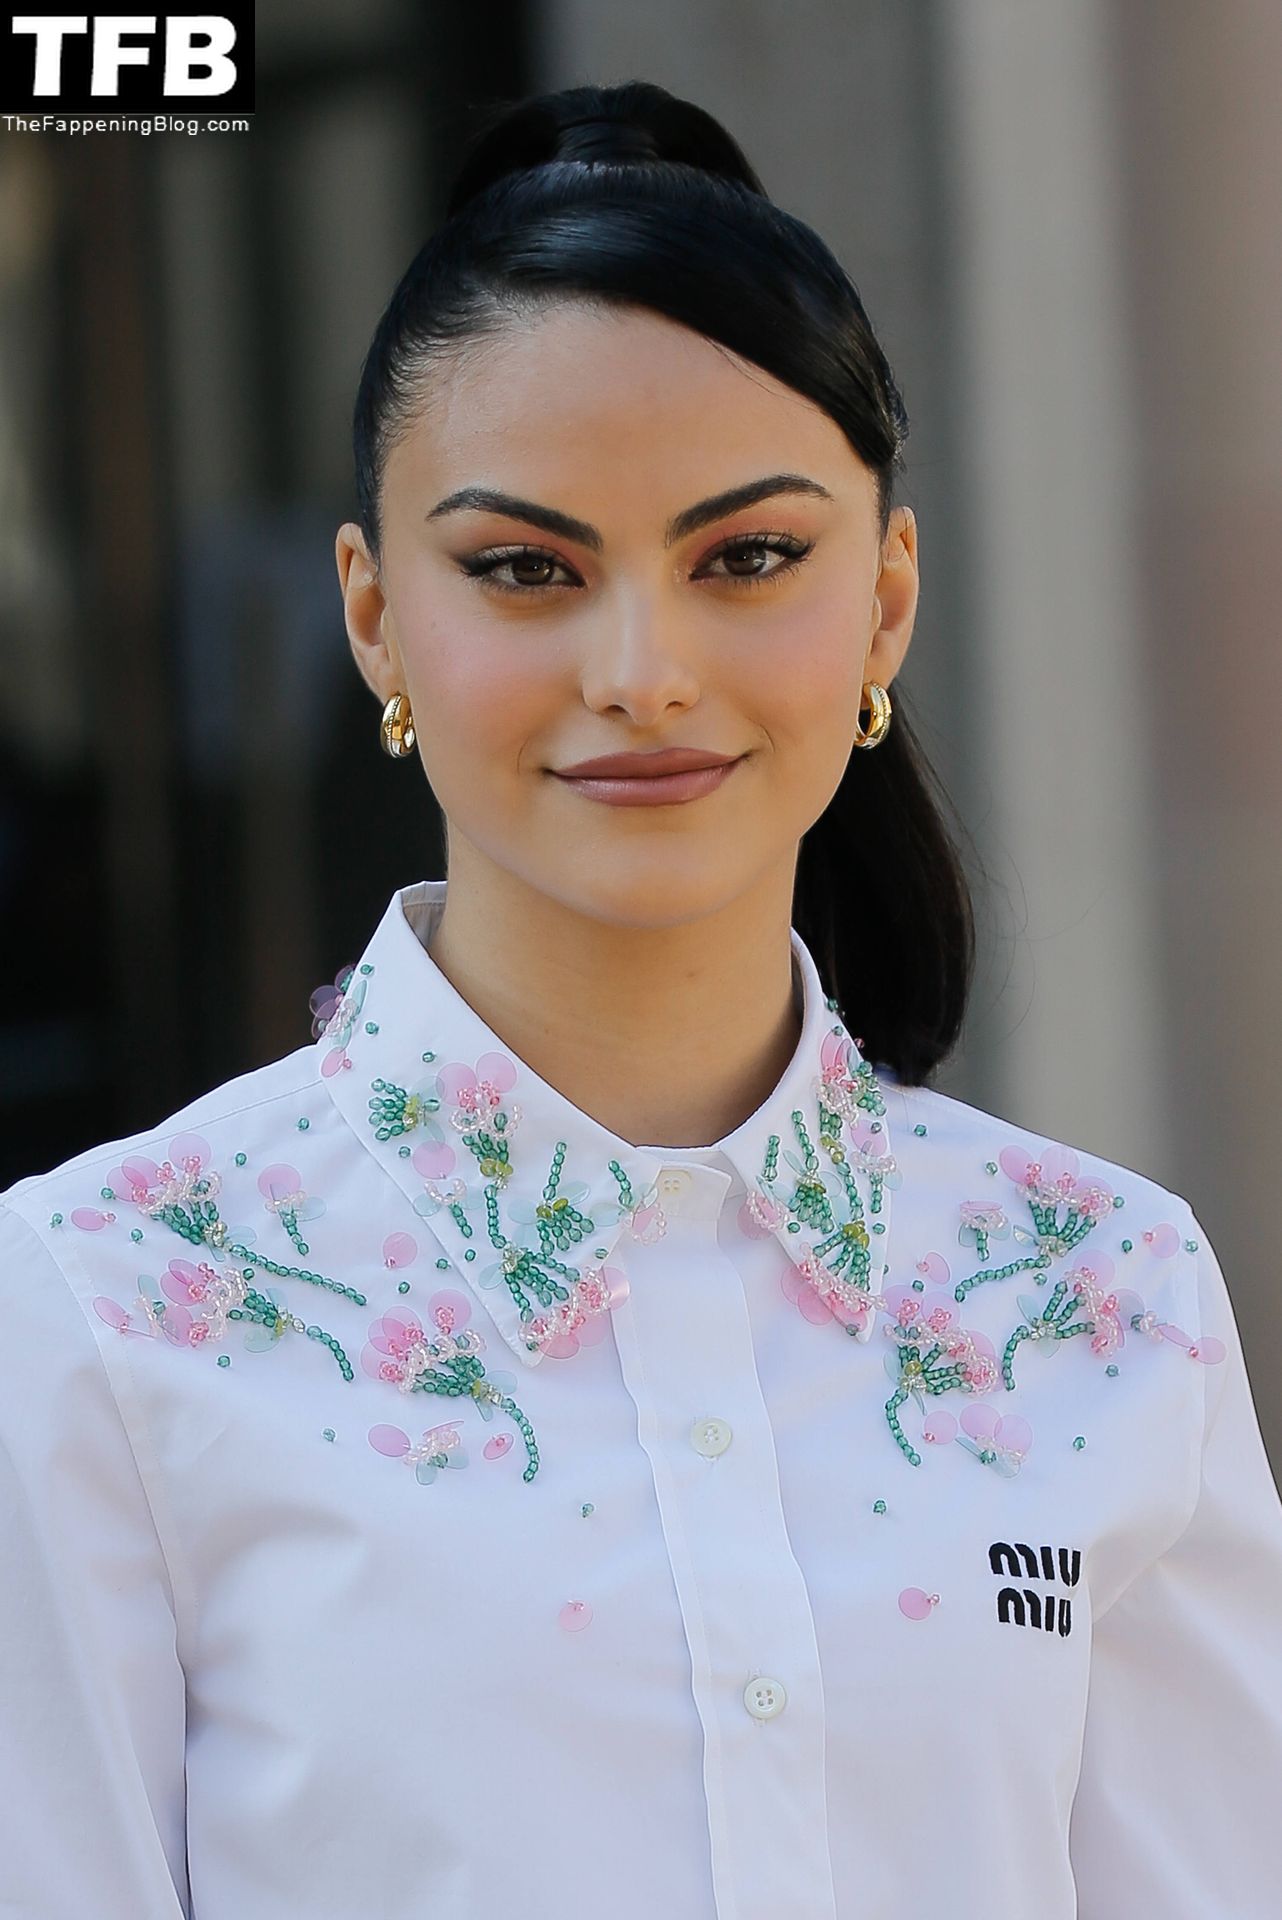 Camila-Mendes-Sexy-The-Fappening-Blog-13.jpg